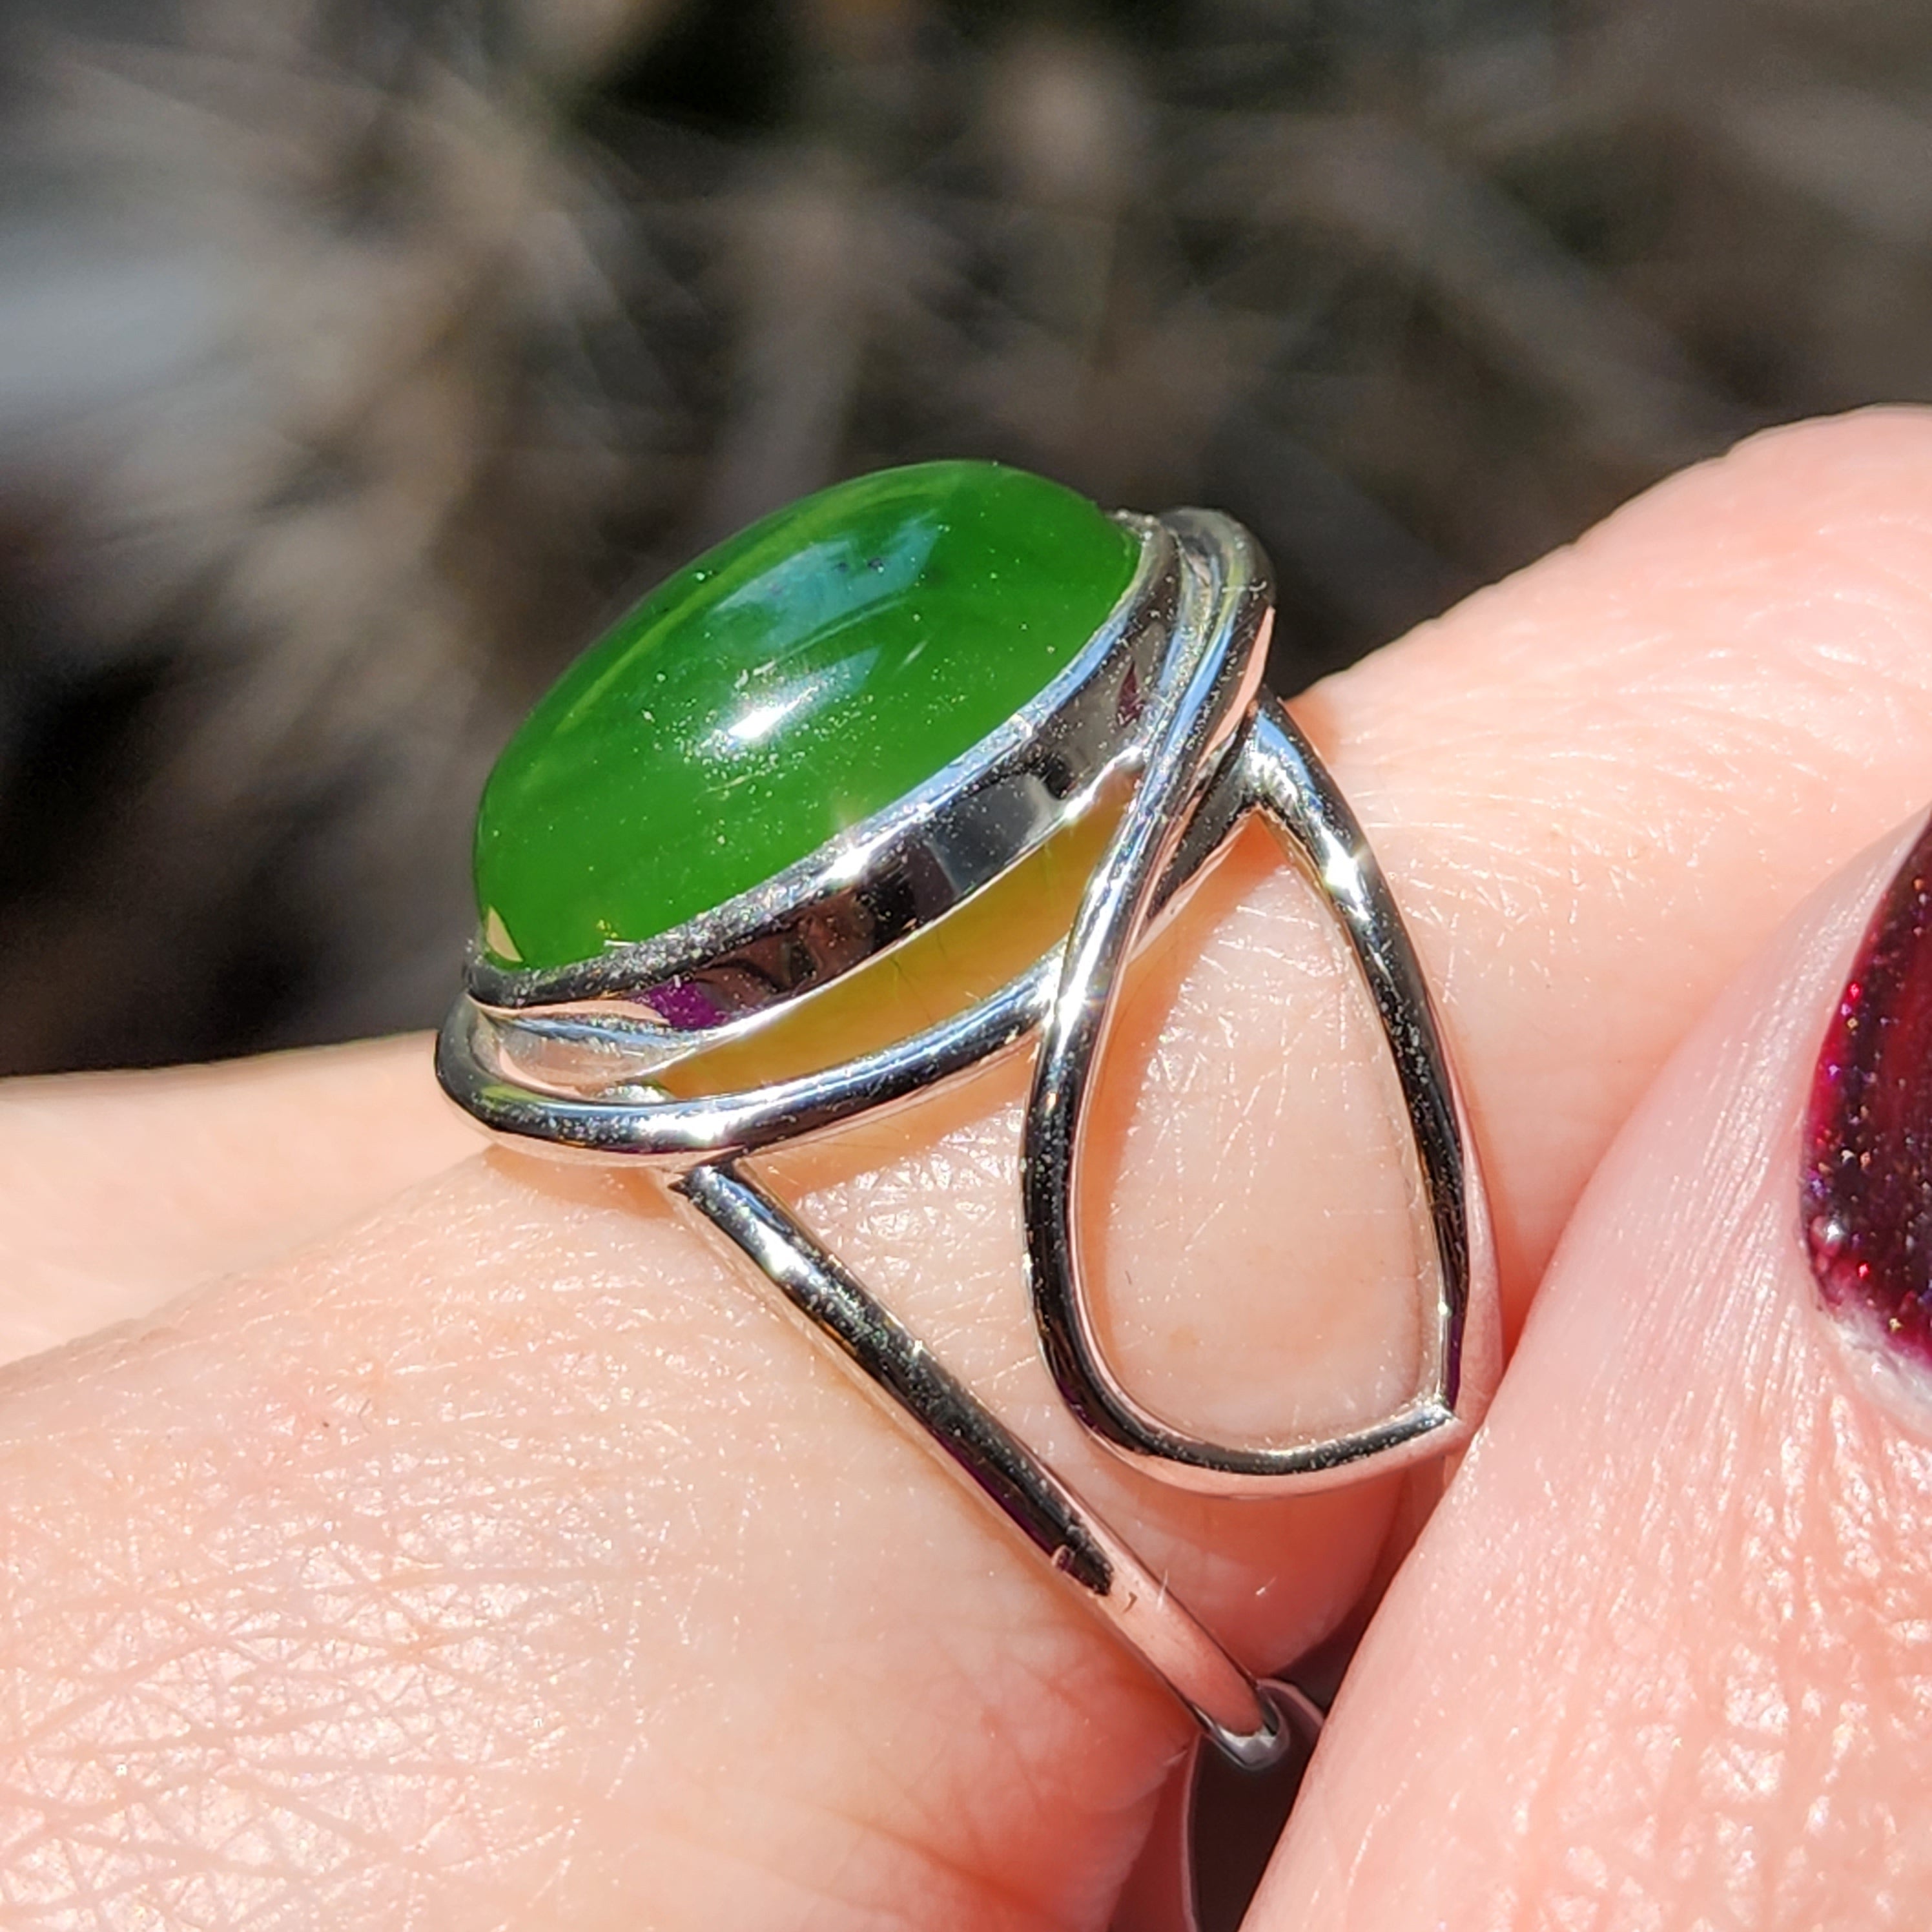 Nephrite Jade Finger Cuff Adjustable Ring .925 Silver for Abundance, Health and Heart Healing